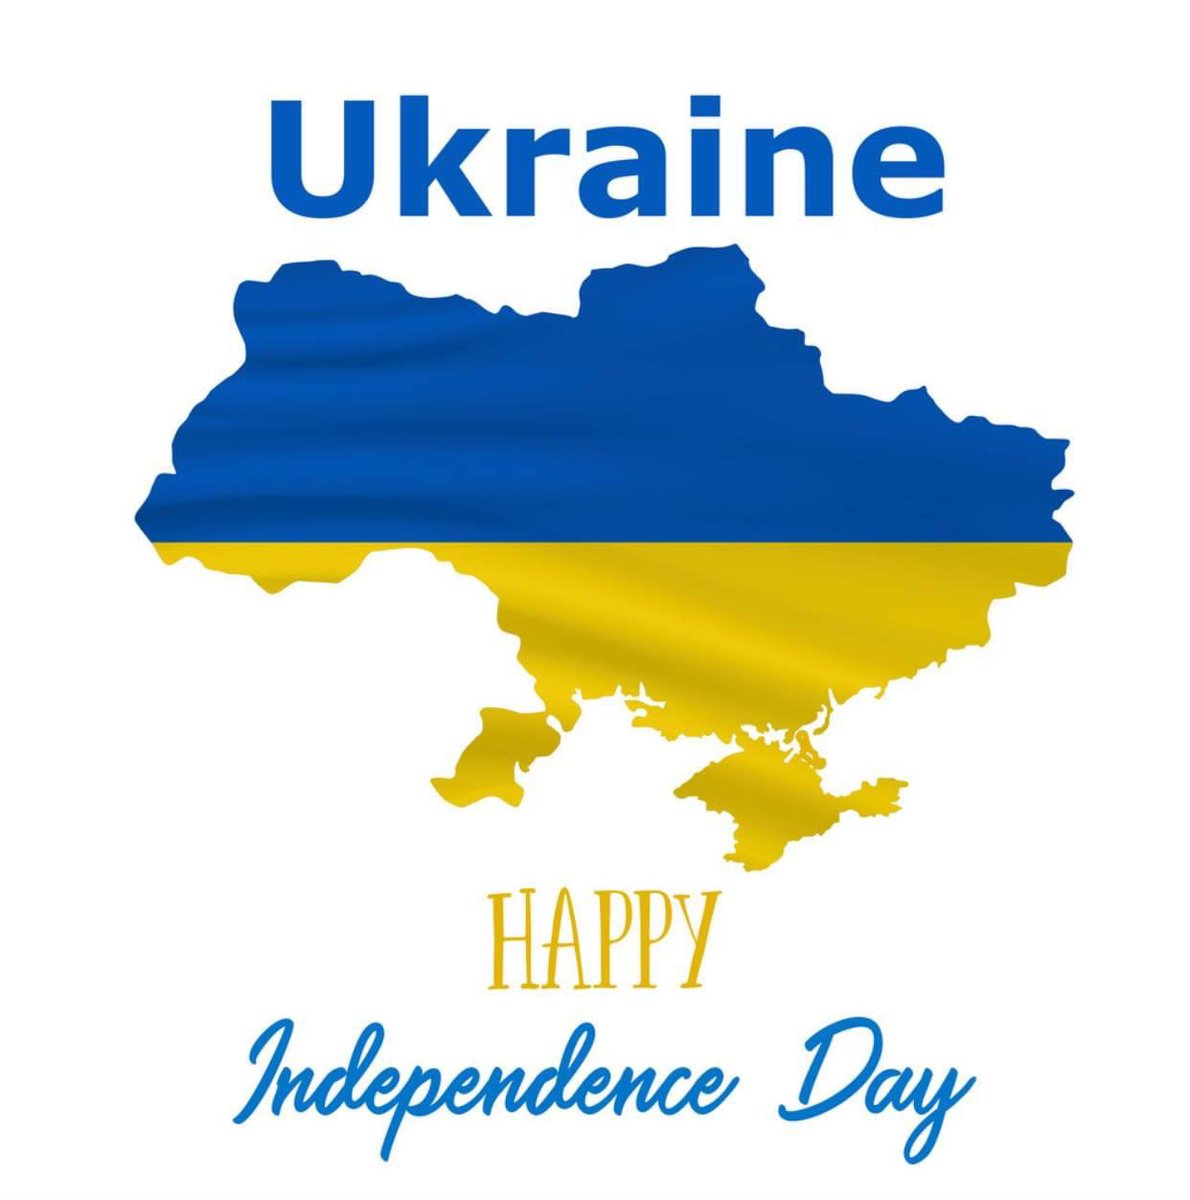 Wishing my fellow Ukrainians a Happy Independence Day! 

Ukraine issued a declaration of independence on August 24th, 1991 and was confirmed on December 1st, 1991.

#UkraineIndependence2021 #UkraineIndependence #UkraineAjax #Ajax https://t.co/QnfORwaSaS